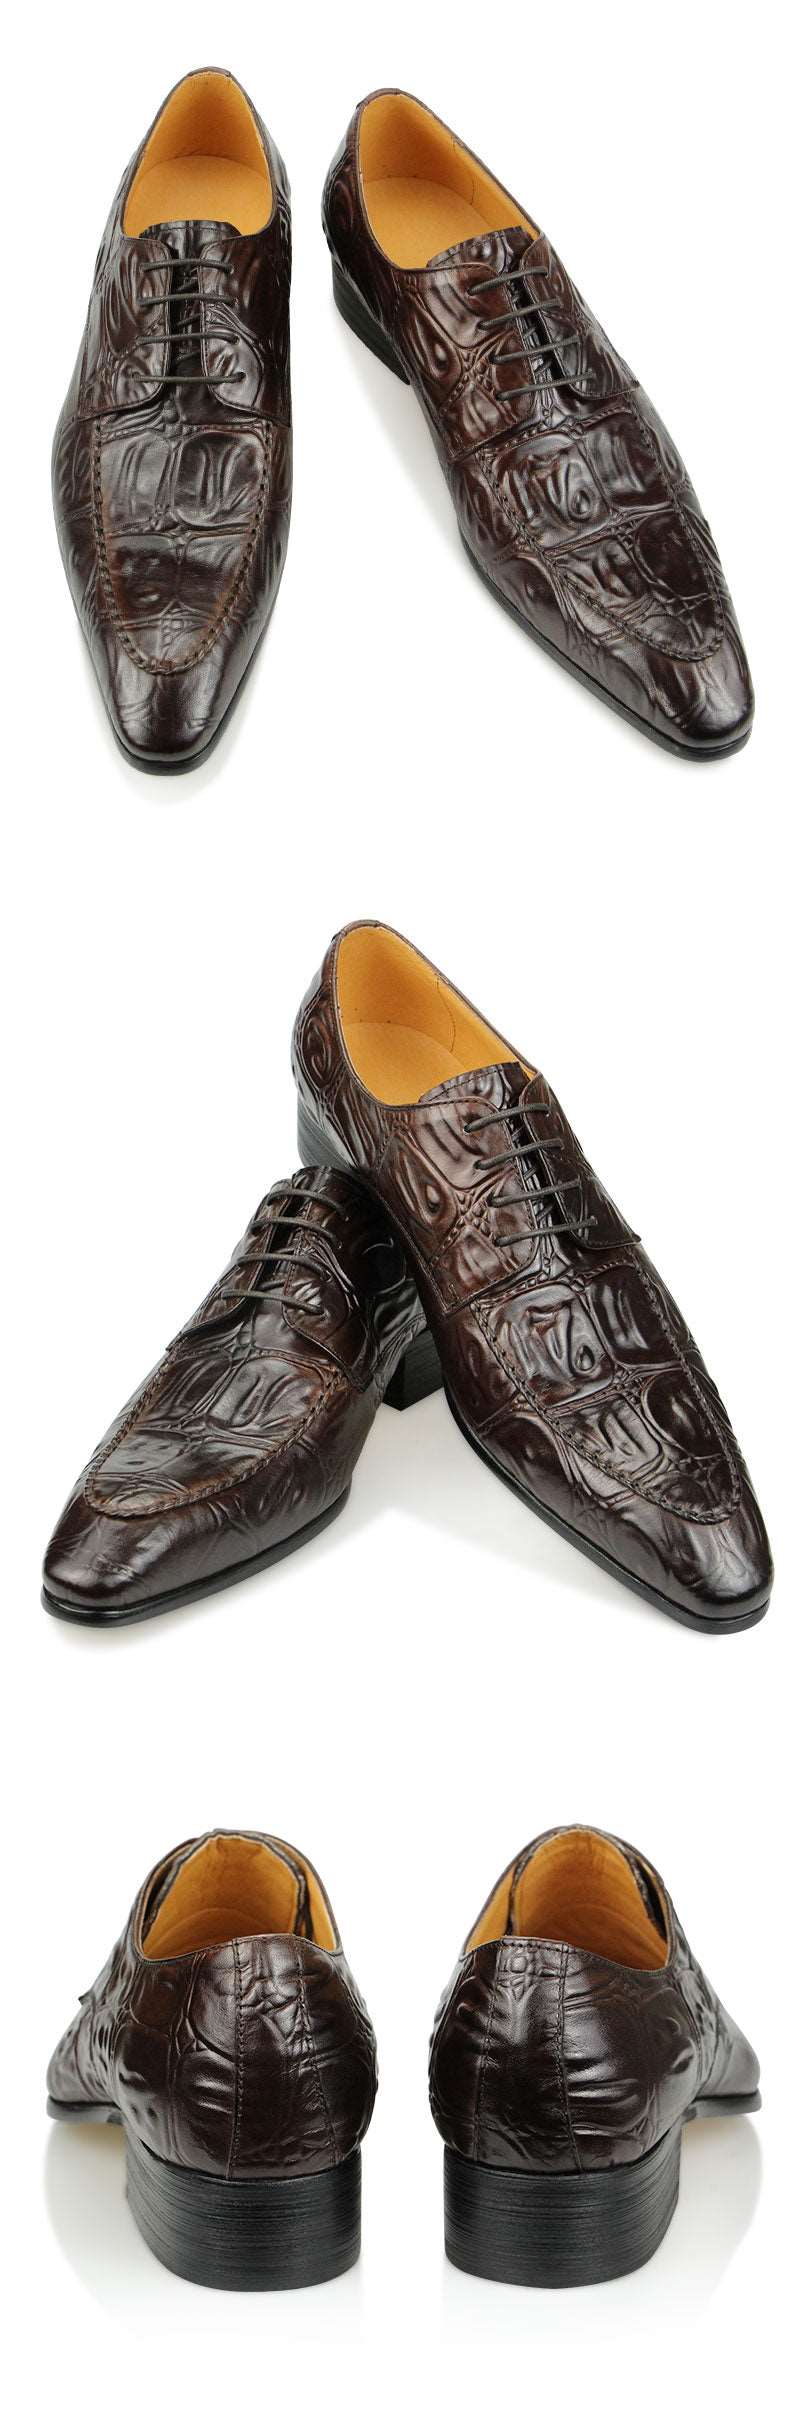 Alligator Printing Luxury Oxford Shoes for Man| All For Me Today